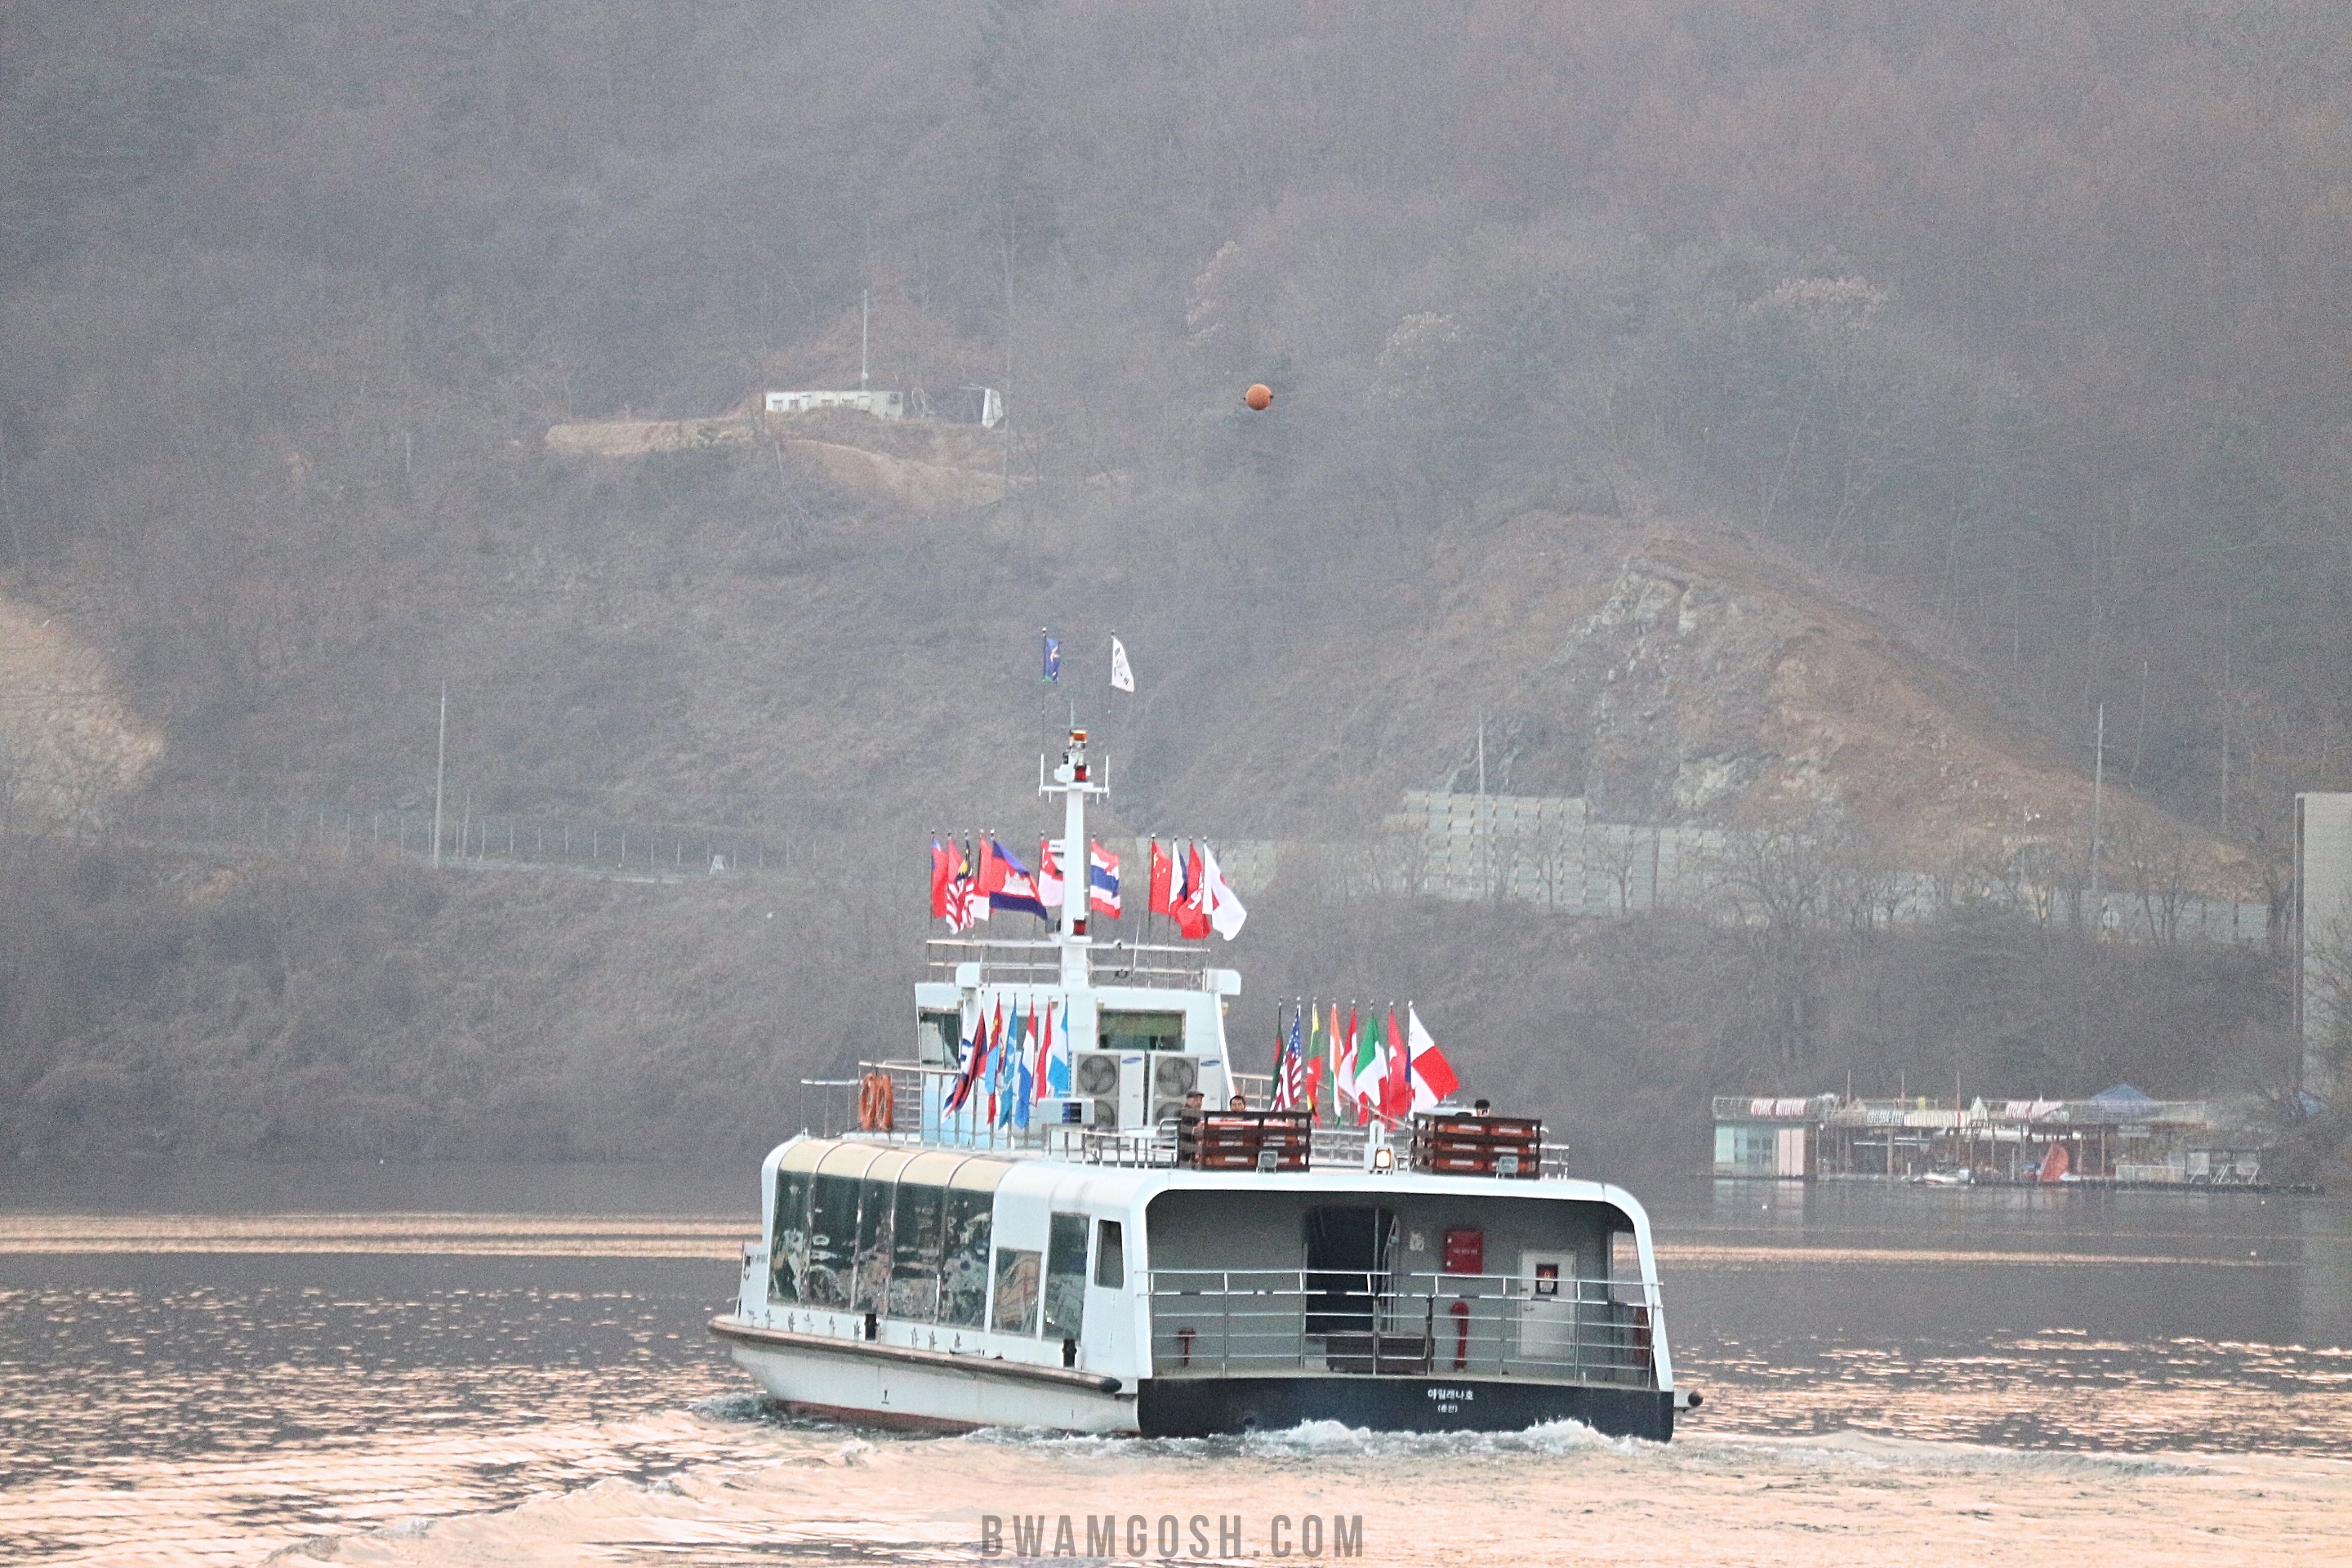 The ferry heads to Nami Island